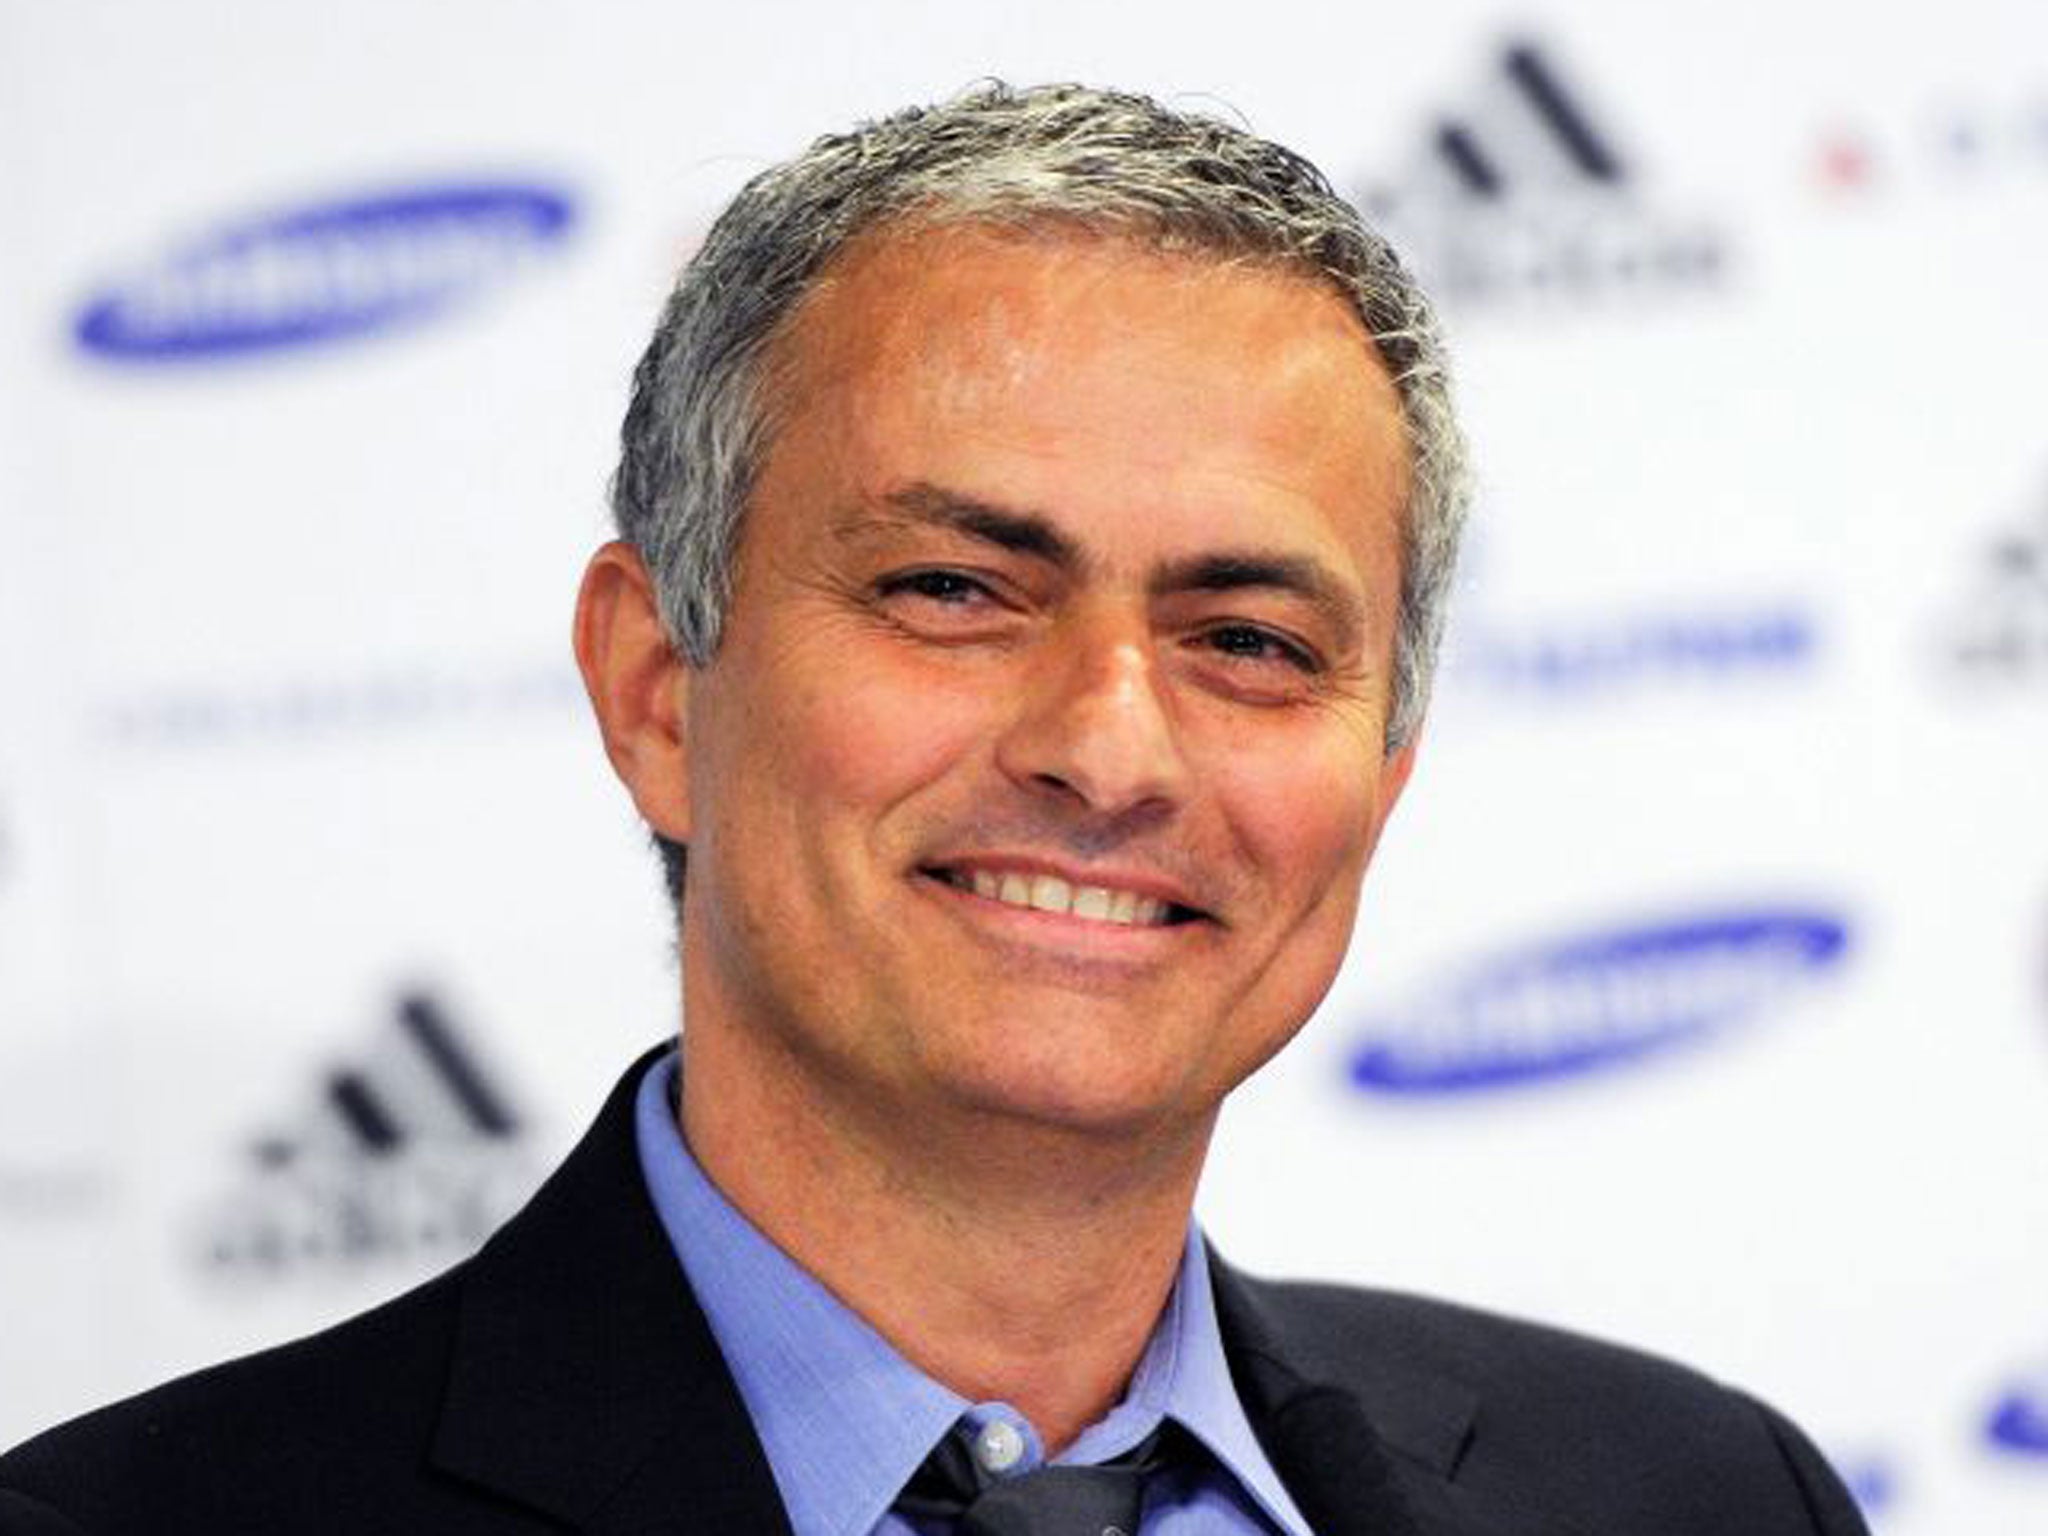 Jose Mourinho was wise to reinvent himself as ‘the happy one’